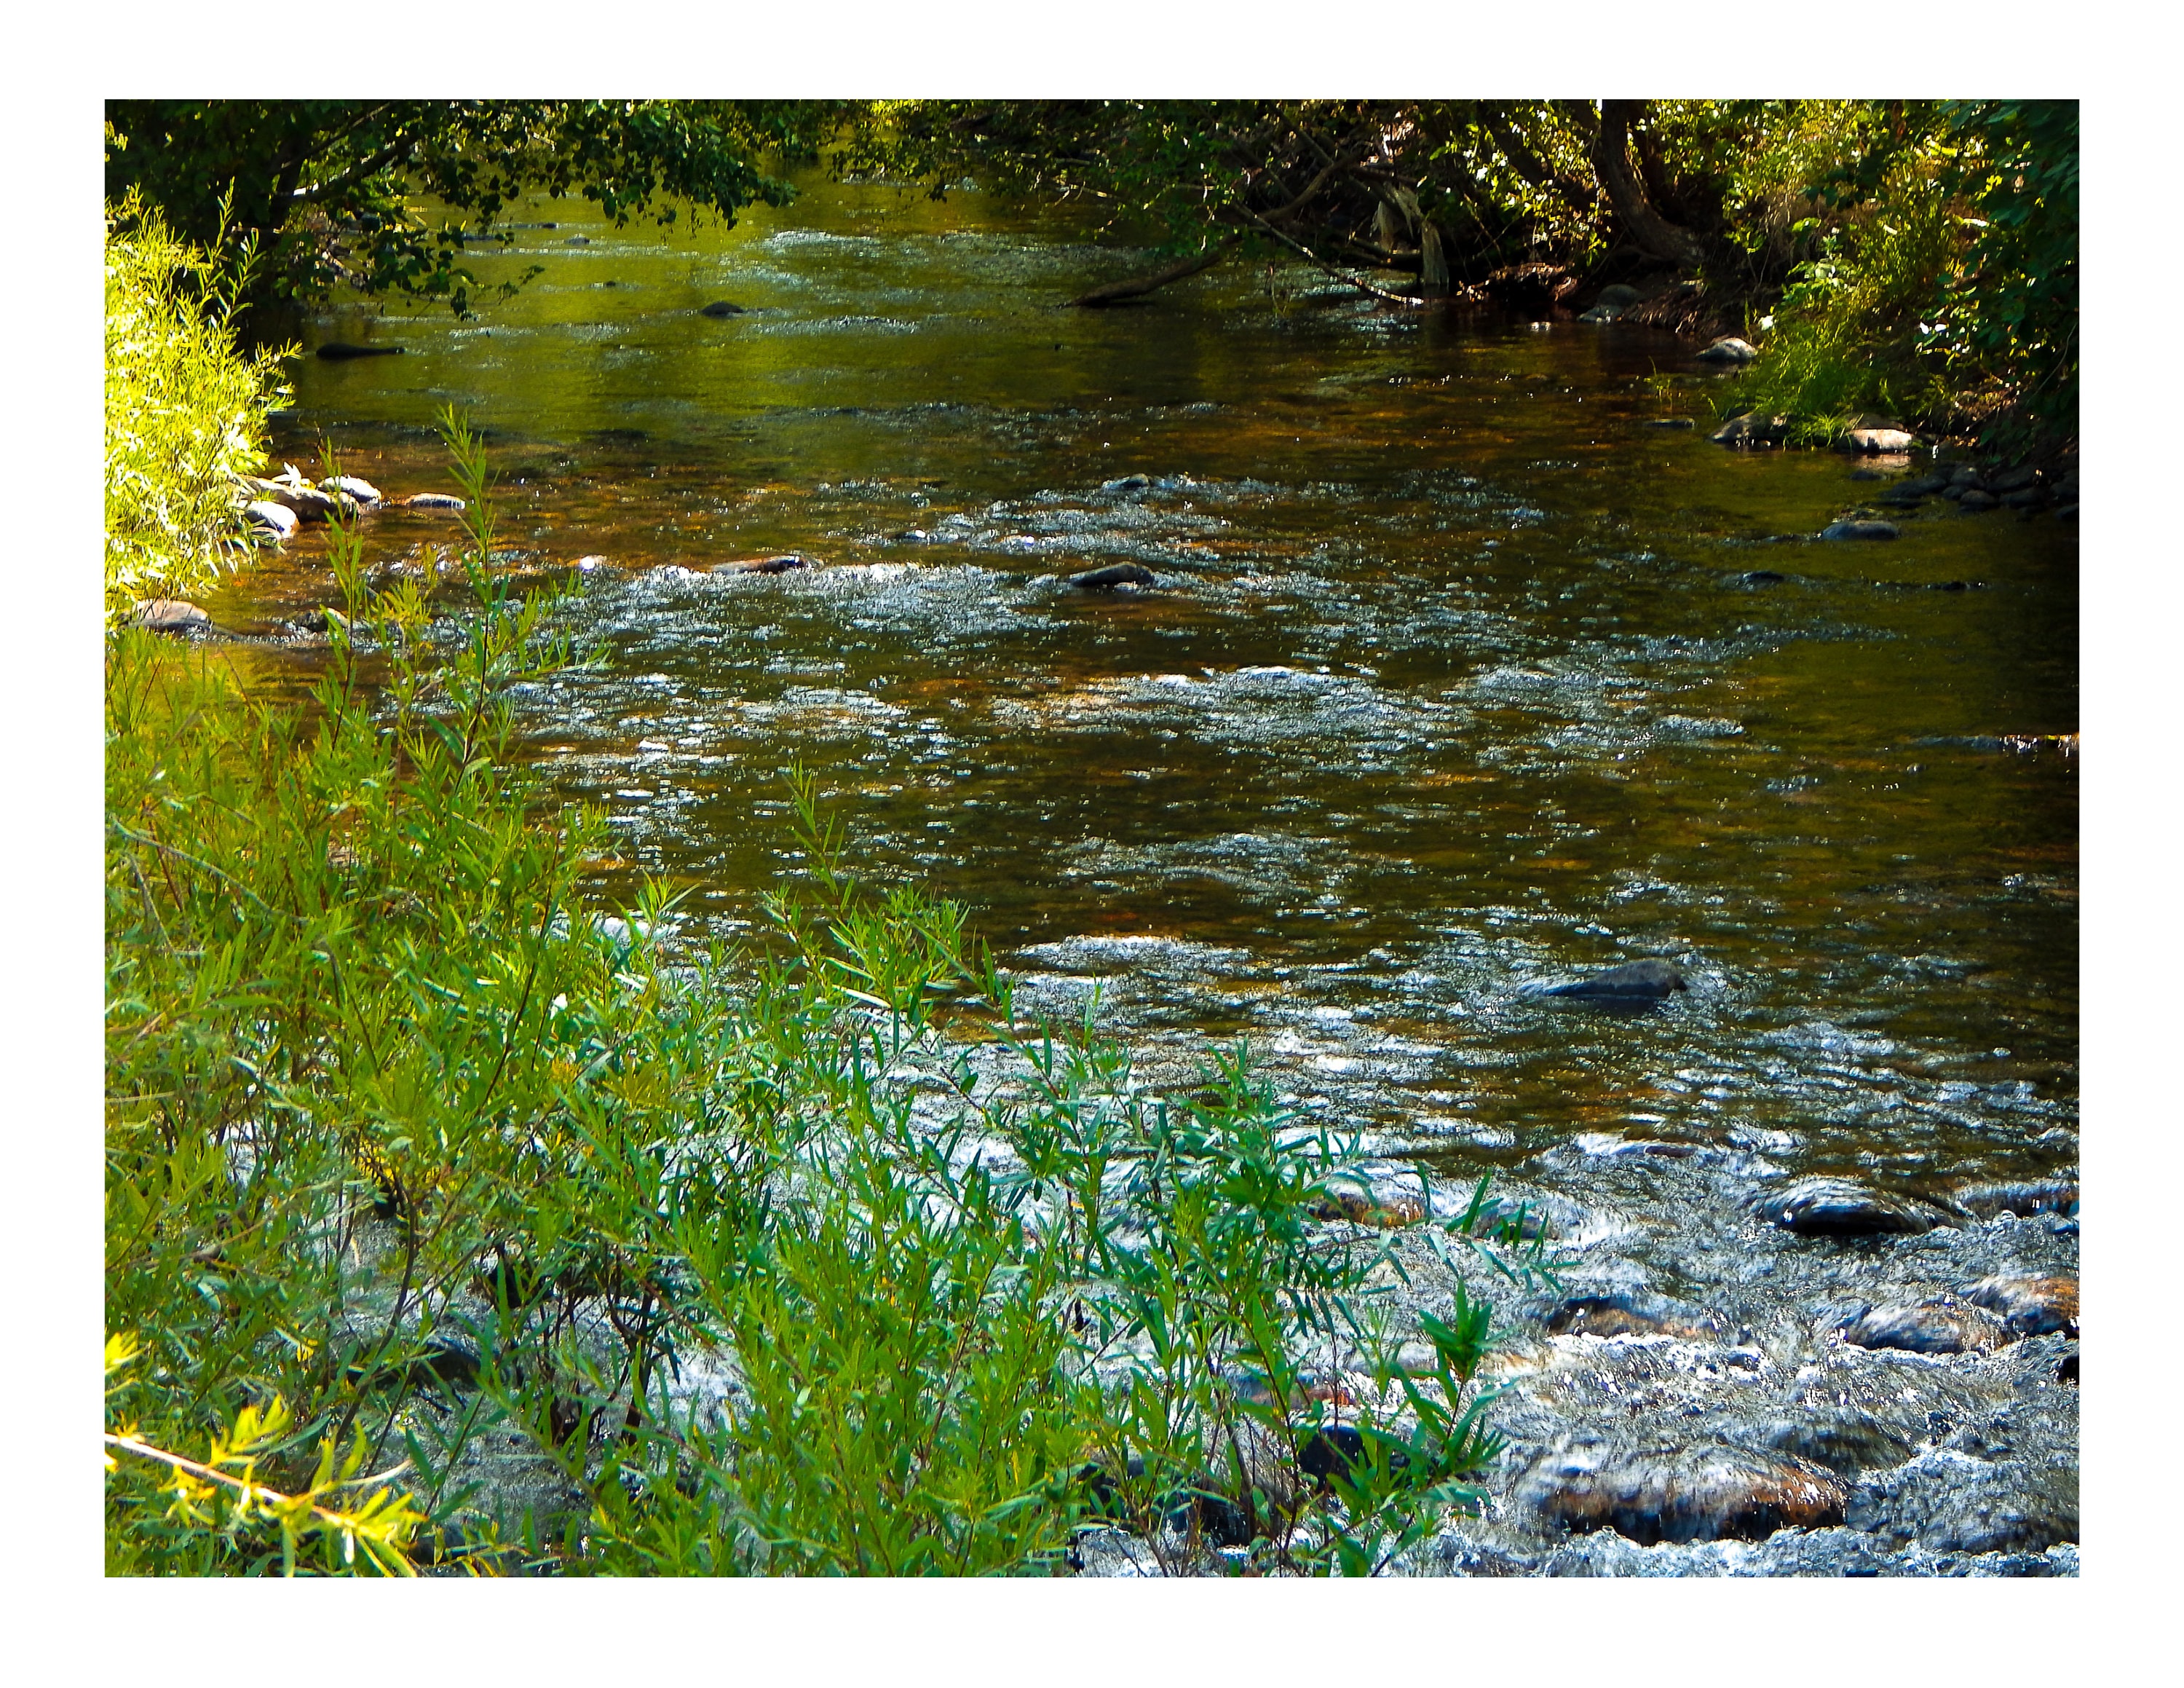 8x10 Digital Print Photo of a Clear Winding Stream Running Over Rocks and through the Woods Bubbling Stream